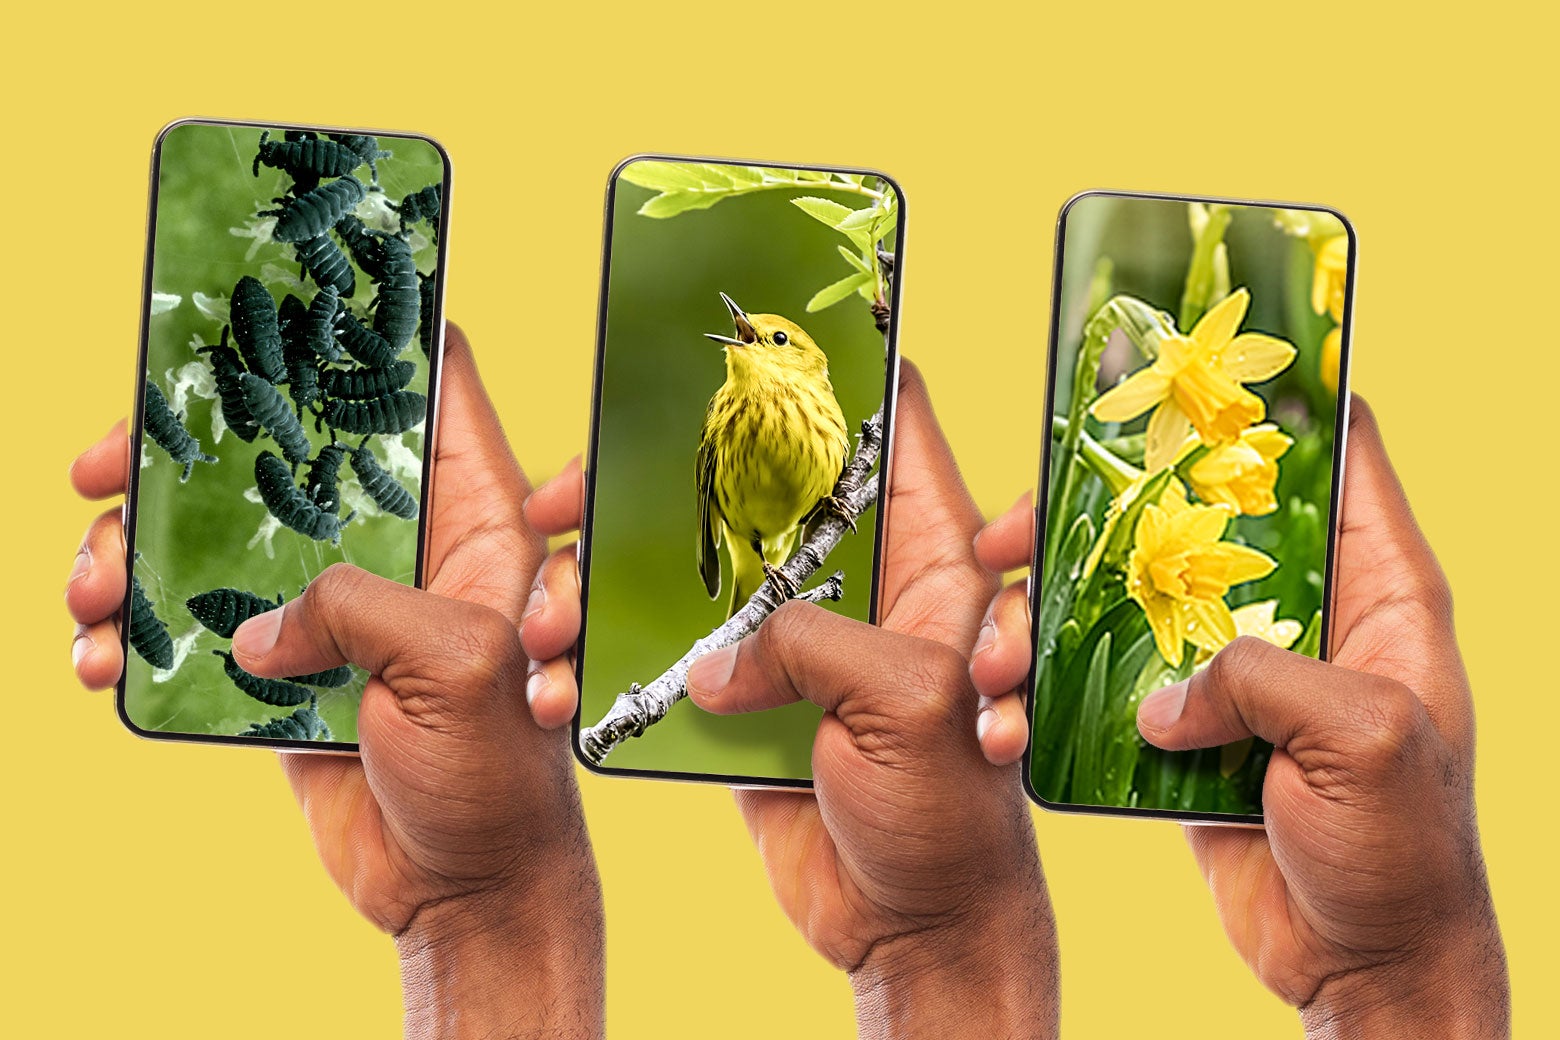 Three hands hold three smartphones, one displaying grubs, one a singing bird perched on a branch, and one daffodils.